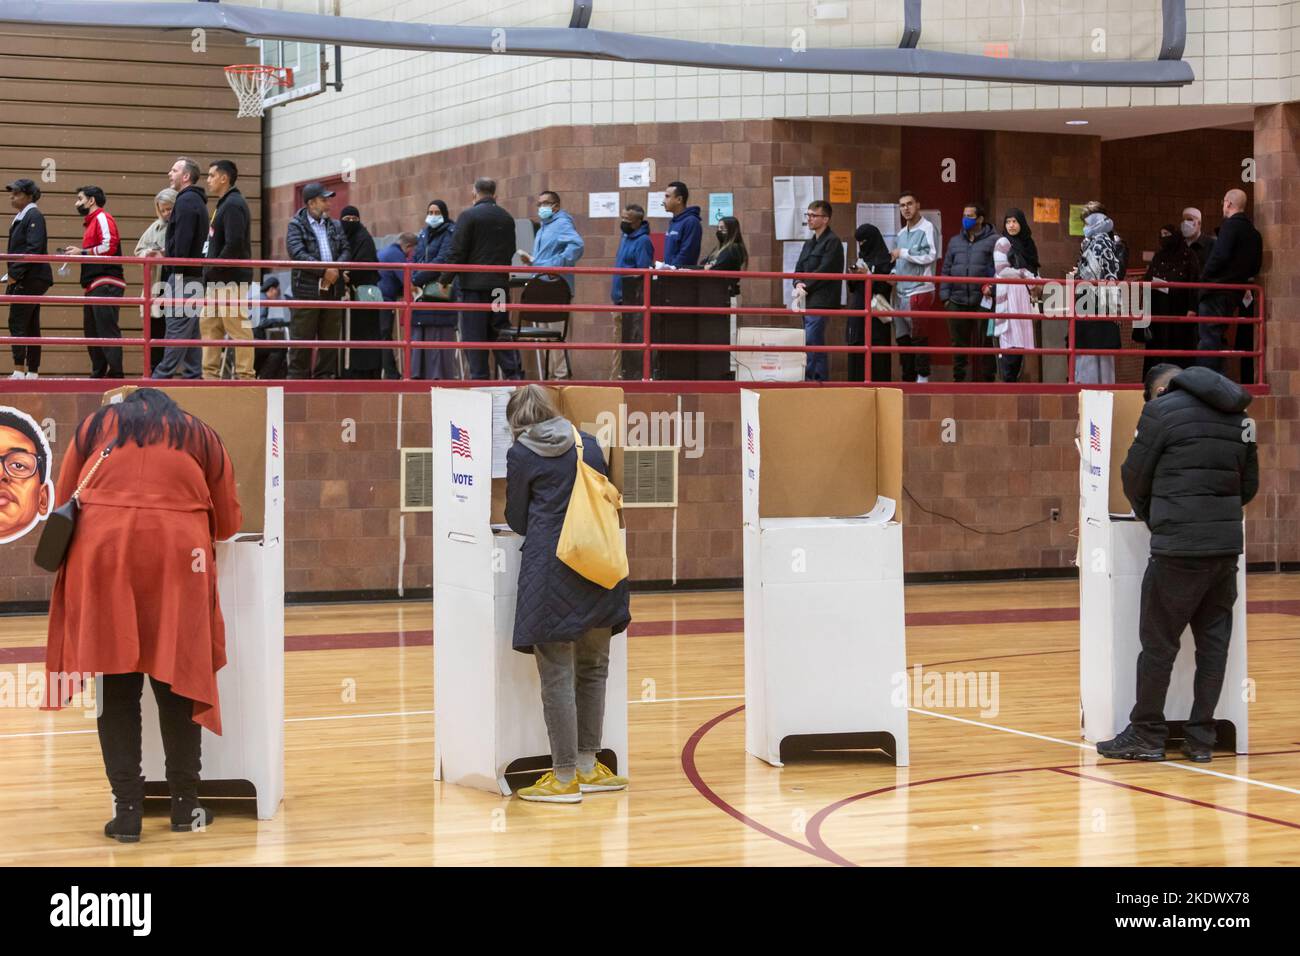 Hamtramck, Michigan, USA. 8th Nov, 2022. Voters cast ballots in the 2022 midterm election at Hamtramck High School. Voters fill out ballots in voting booths on the gym floor, while voters in a different precinct above wait in line. Credit: Jim West/Alamy Live News Stock Photo